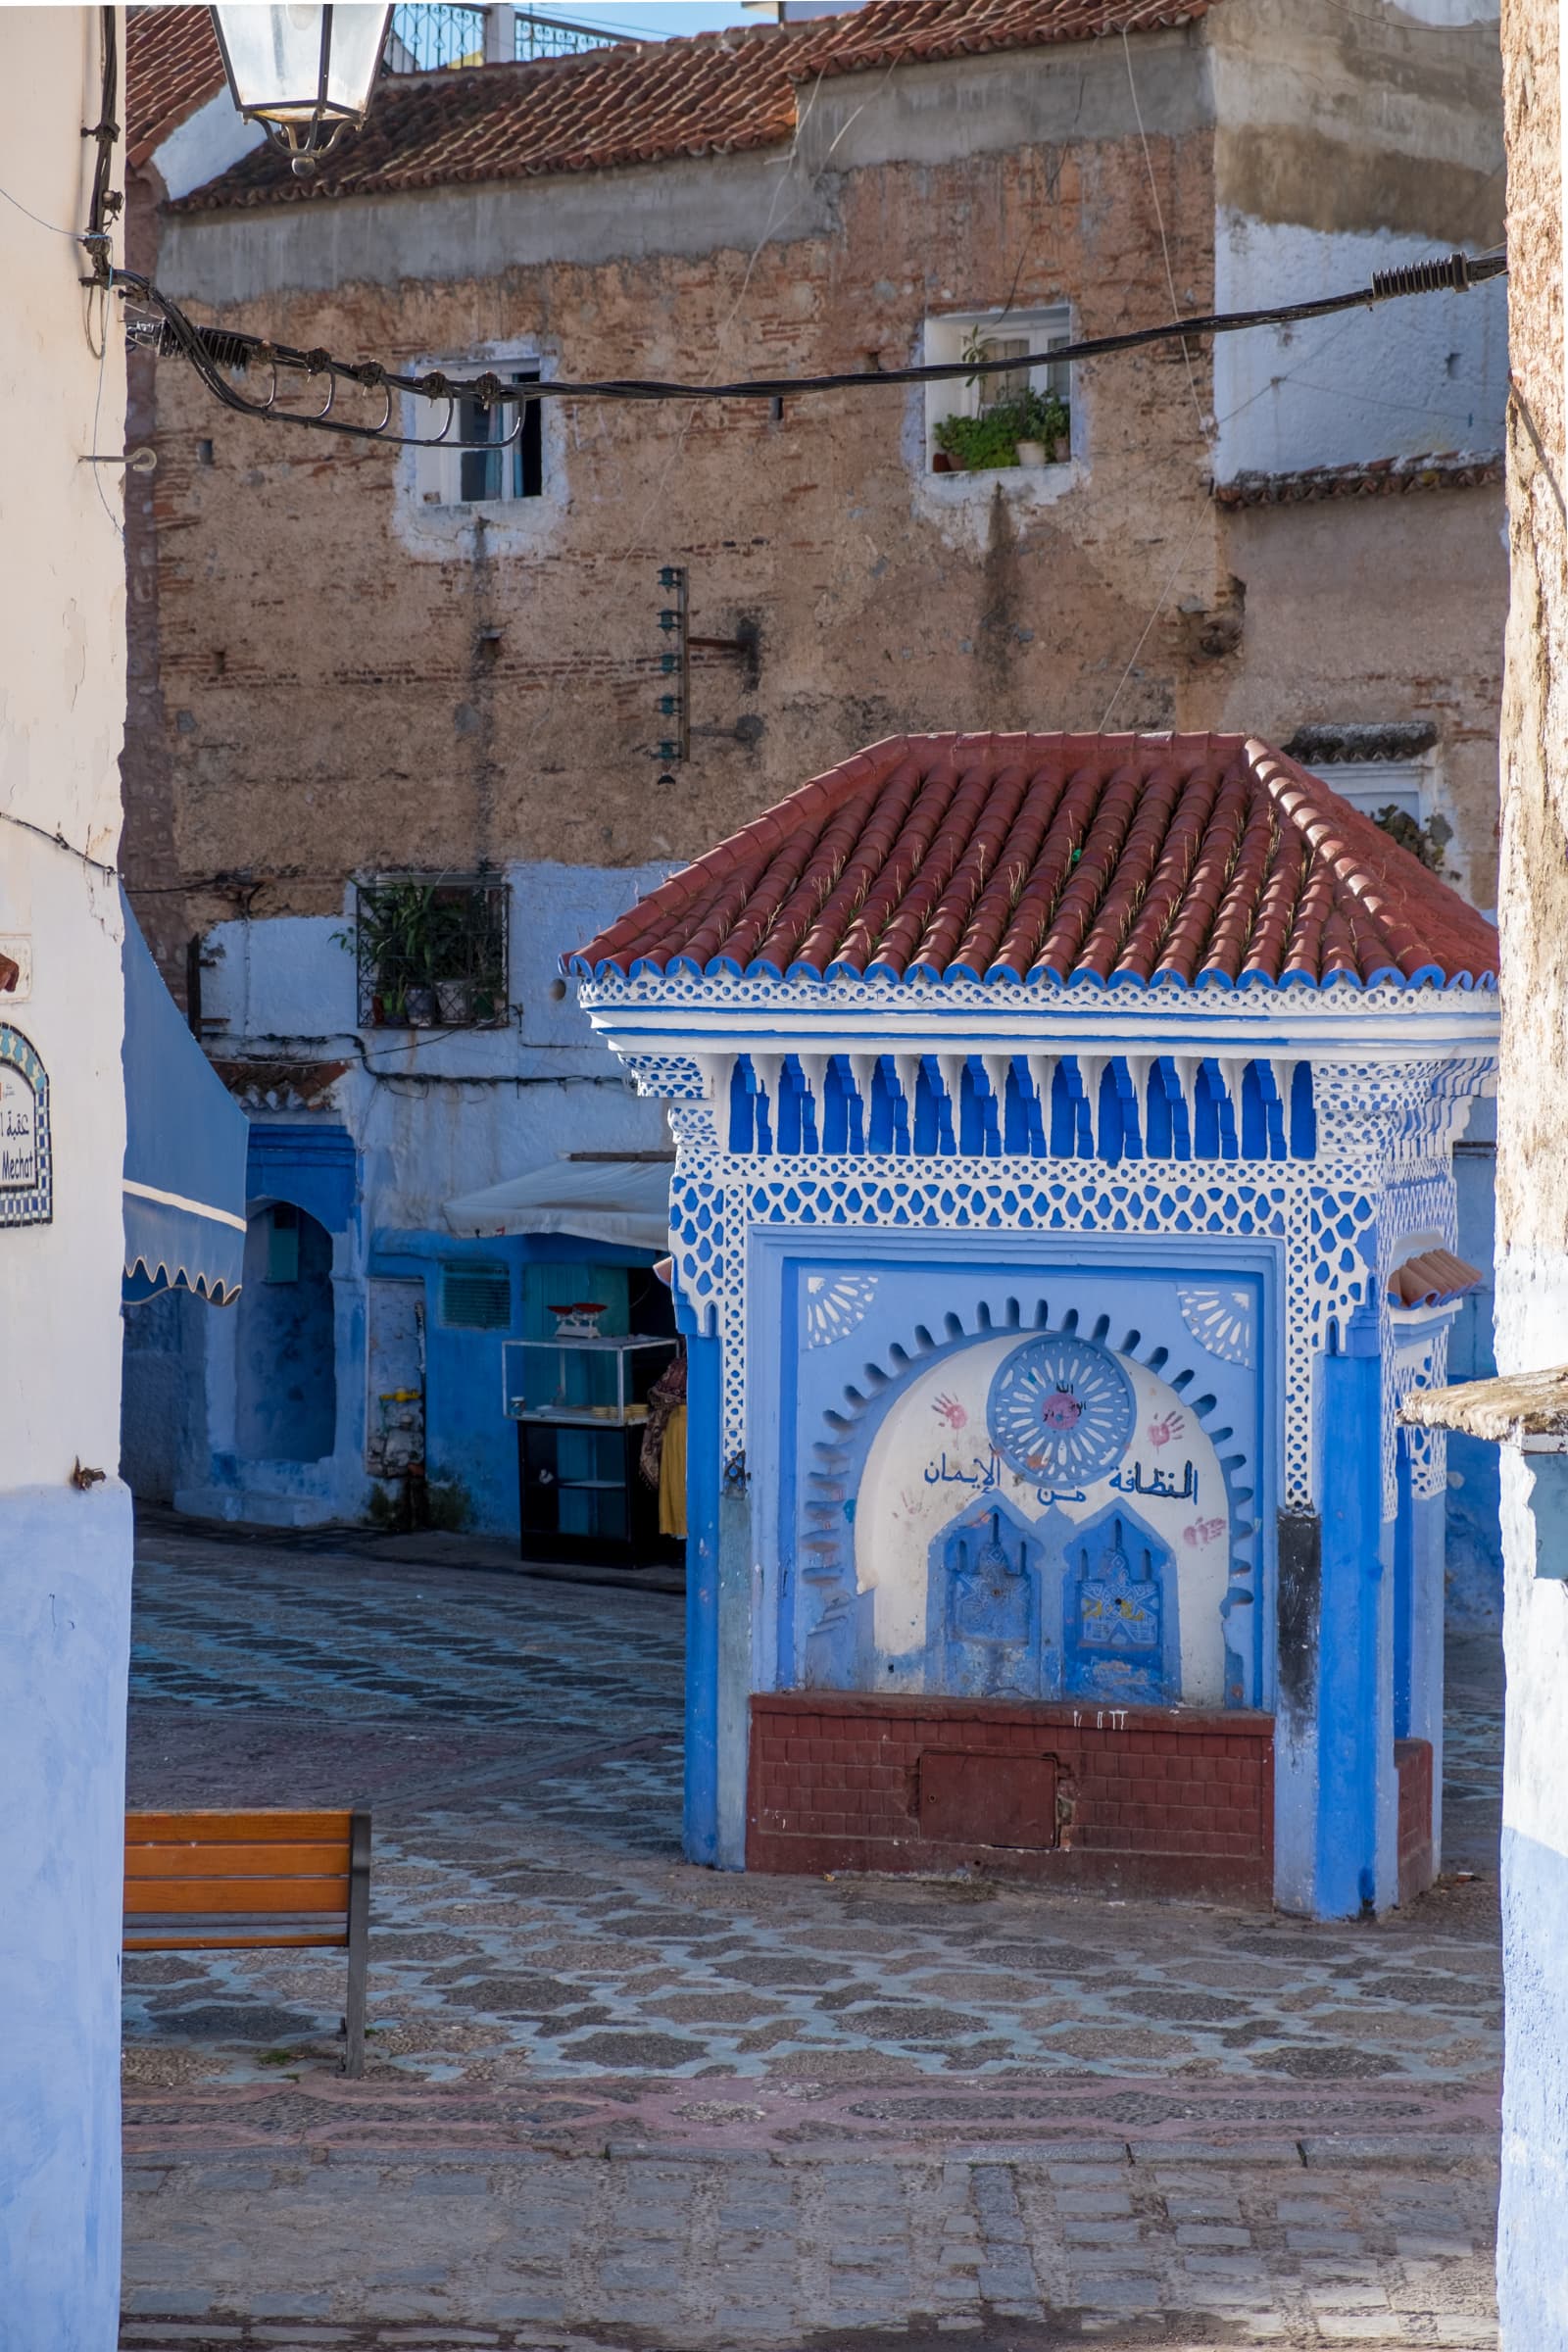 A intricately decorated fountain in Al-Hawta square, Chefchaouen, Morocco